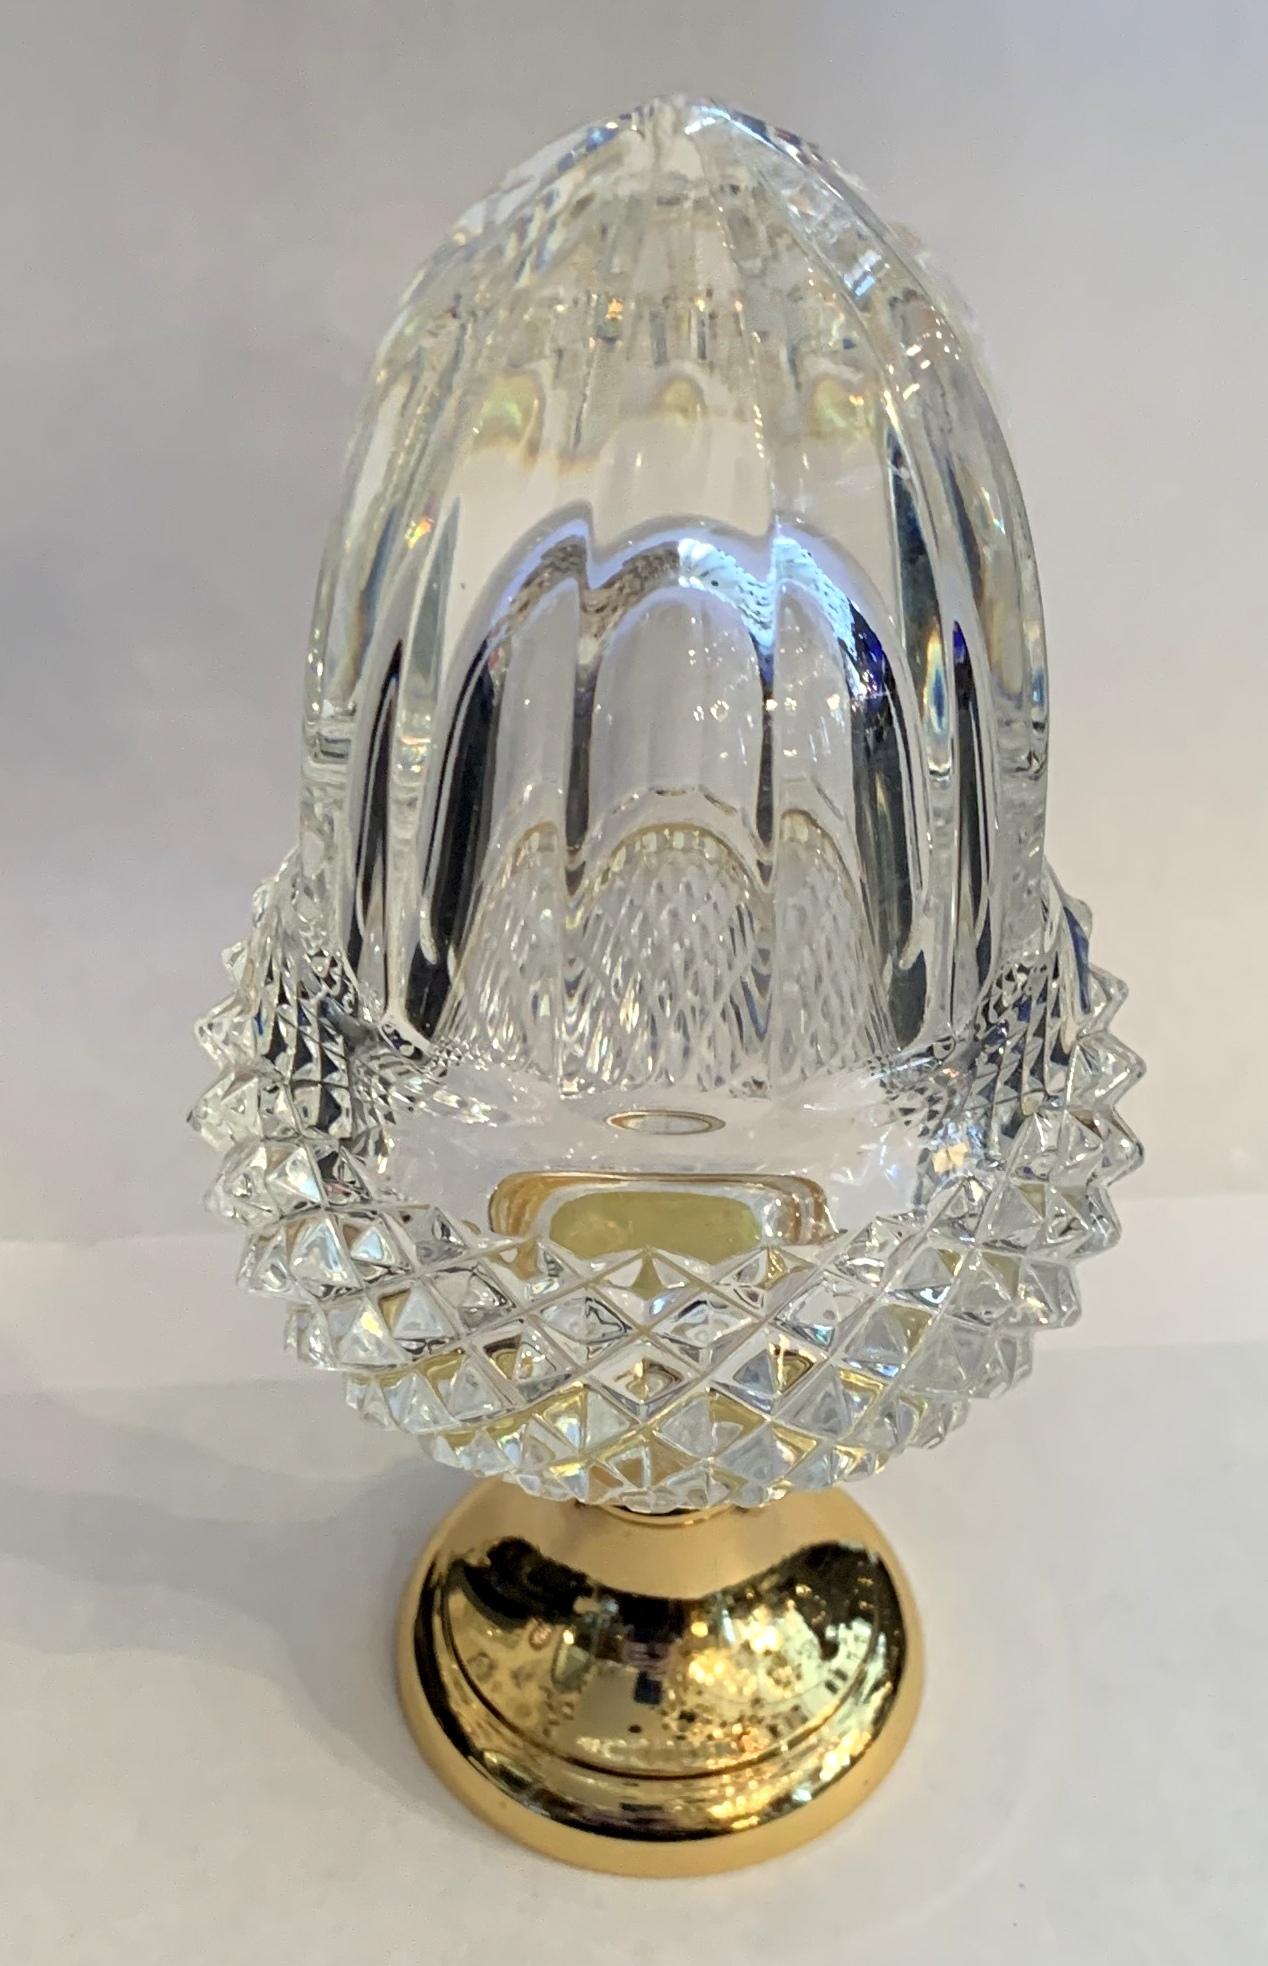 A wonderful crystal acorn cut faceted glass and brass banister newel post finial to finish off any staircase or just a beautiful decorative element piece for any room.